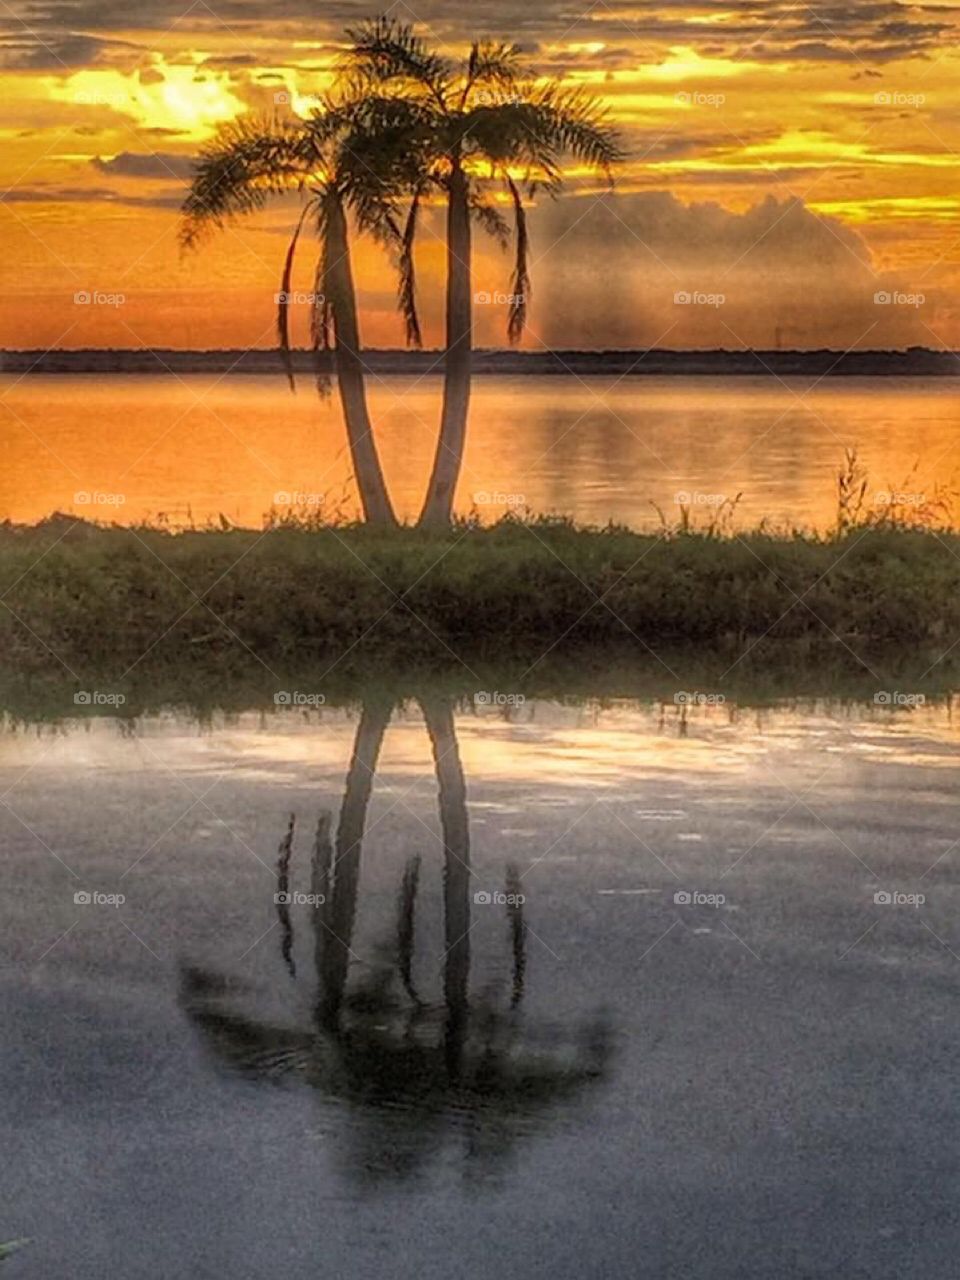 Silhouette of palm trees reflected in the water during a sunset